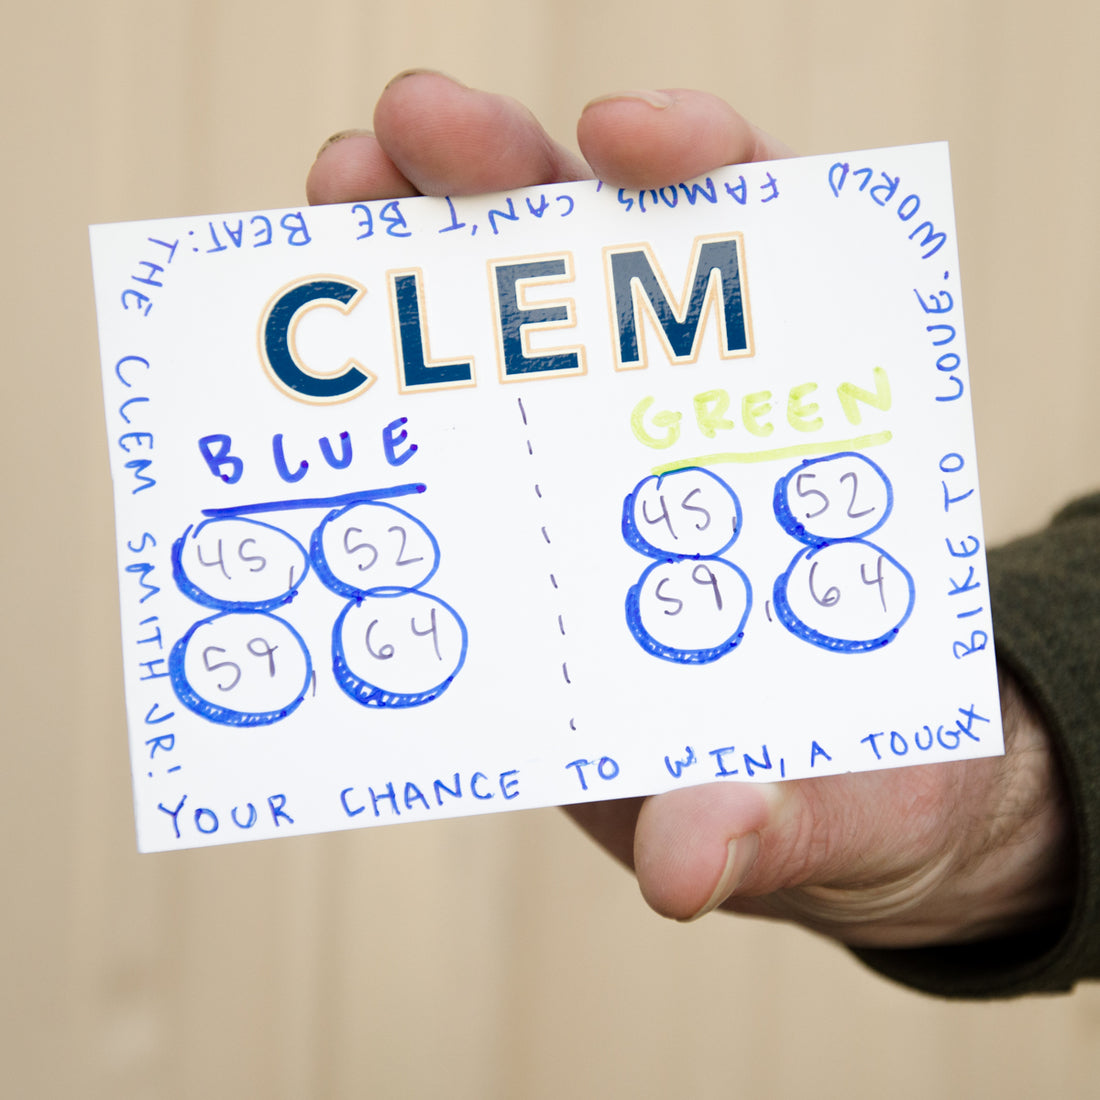 Clem Lotto Tickets on sale 'til Friday the 15th